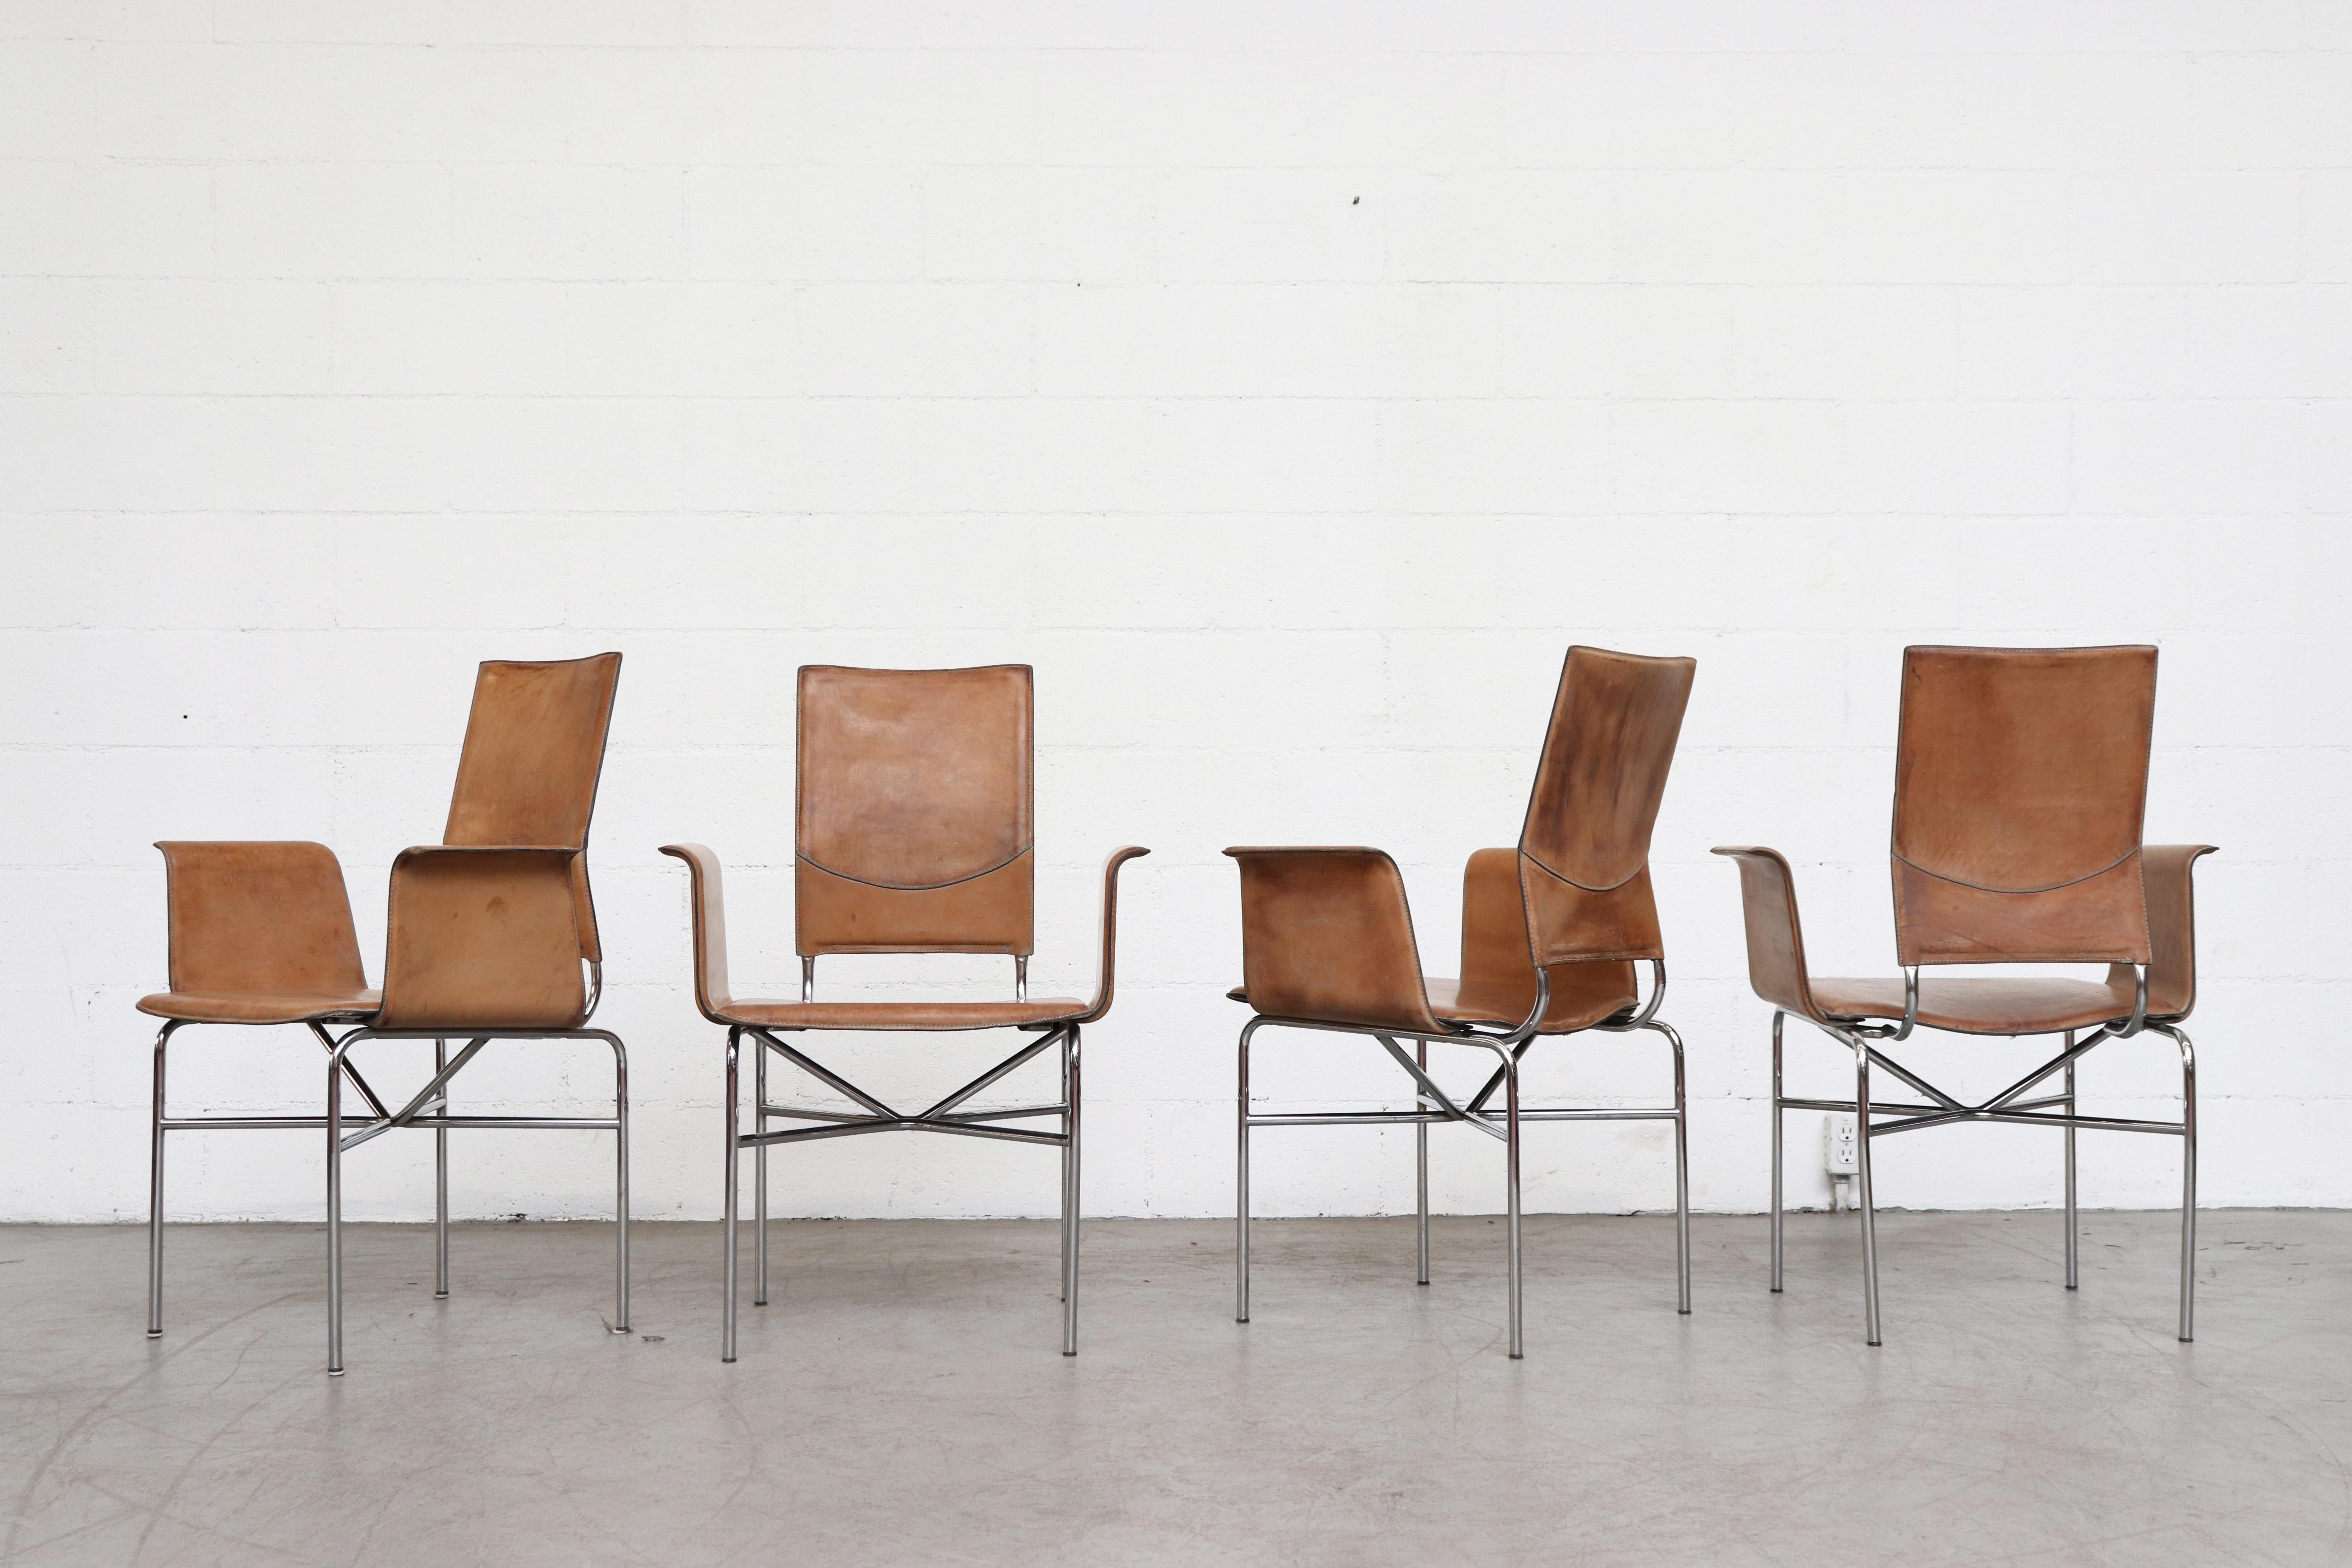 Set of 4 Matteo Grassi leather wing chairs with natural leather seating and chrome frames. Originally in grey painted leather. The original grey paint has been stripped to expose the beautiful natural leather. Printed Matteo Grassi logo on leather